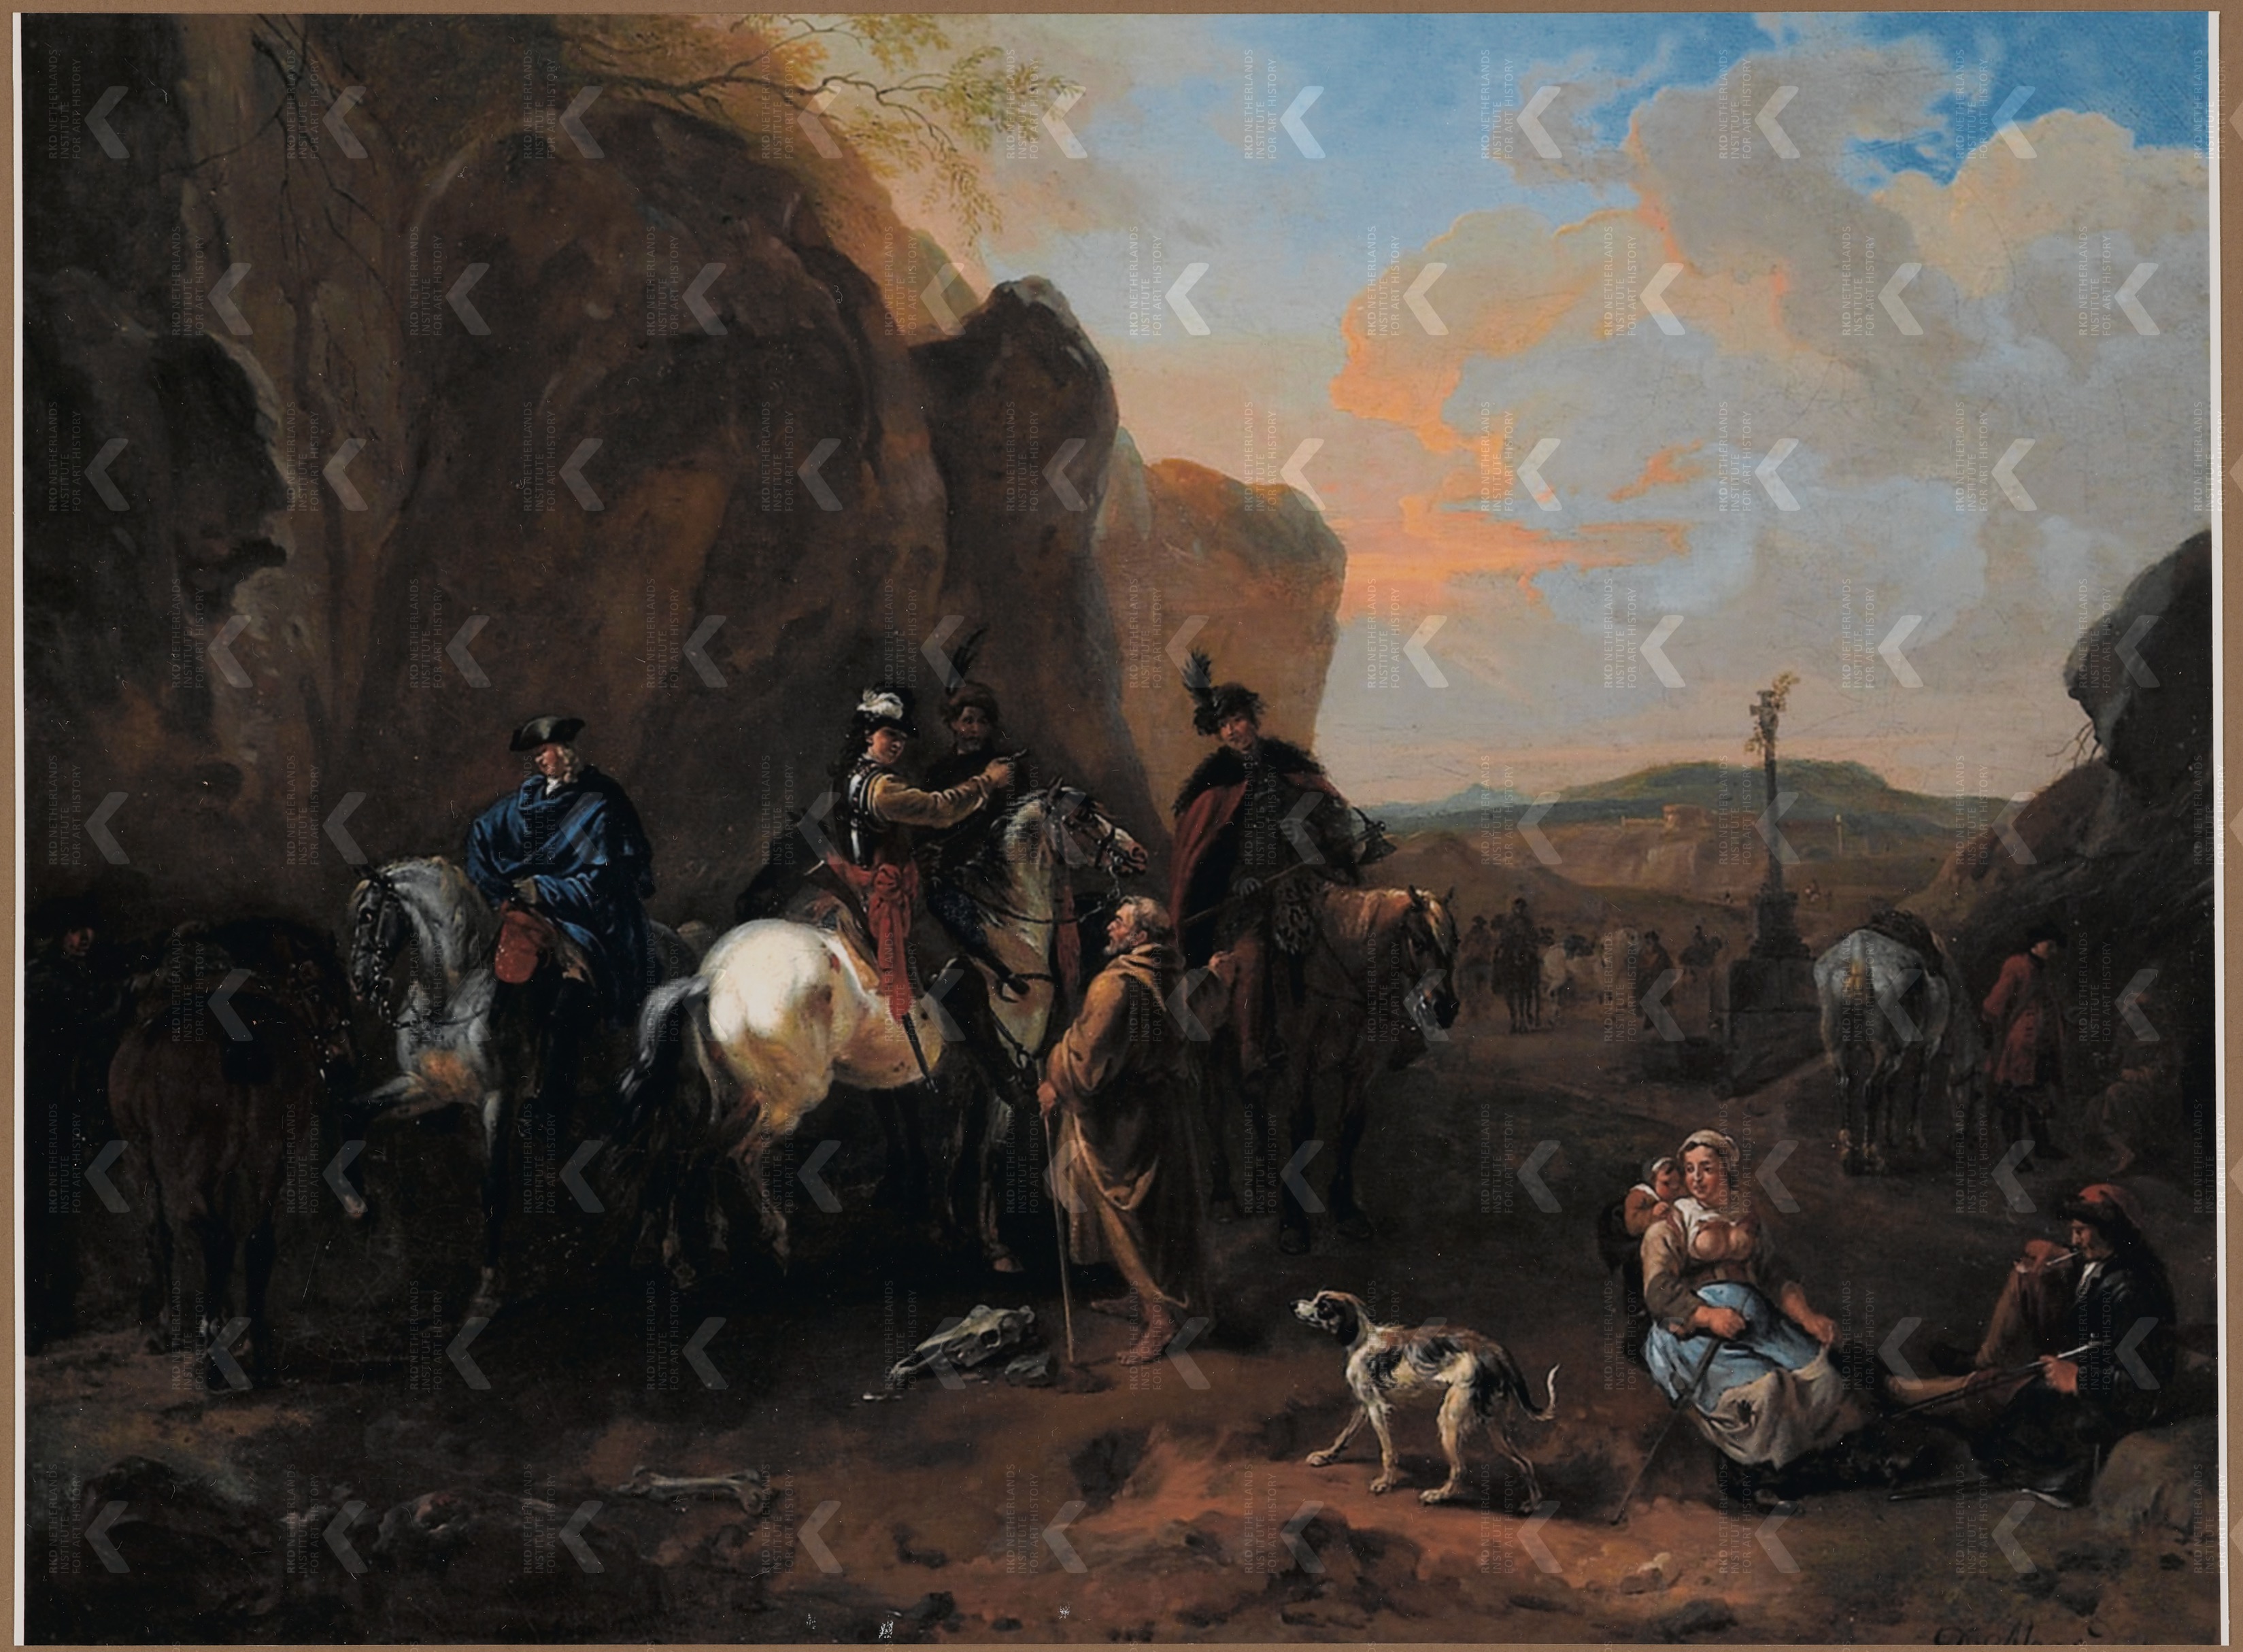 Dirk Maas Landscape with cossacks asking directions from a monk private collection 1674 - 1717